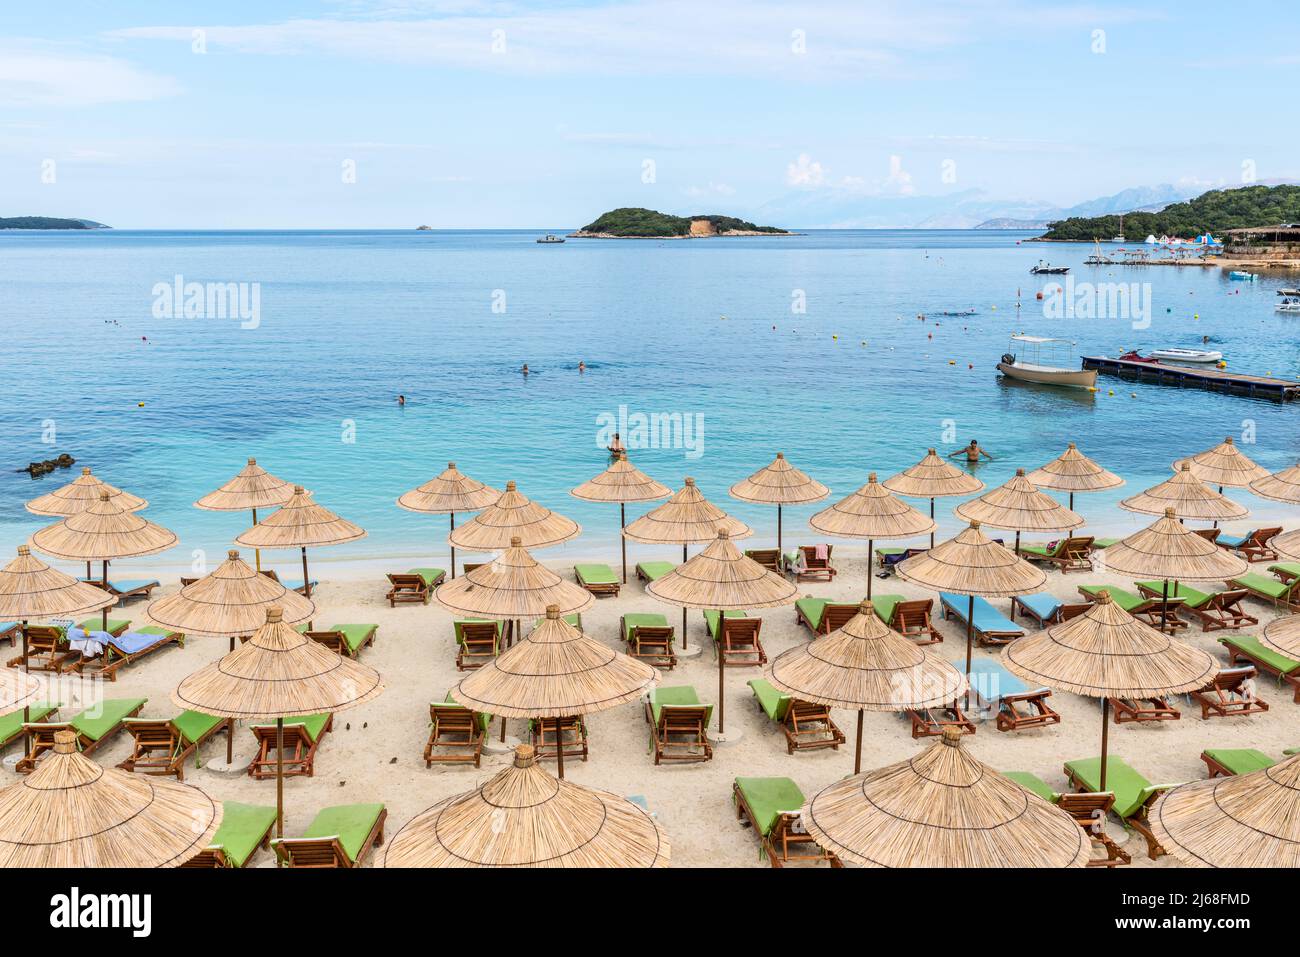 Ksamil, Albania - September 9, 2021: Umbrellas in rows on the Cocoa beach in the shadow of the clouds in Ksamil, Albania. Vacation concept background. Stock Photo